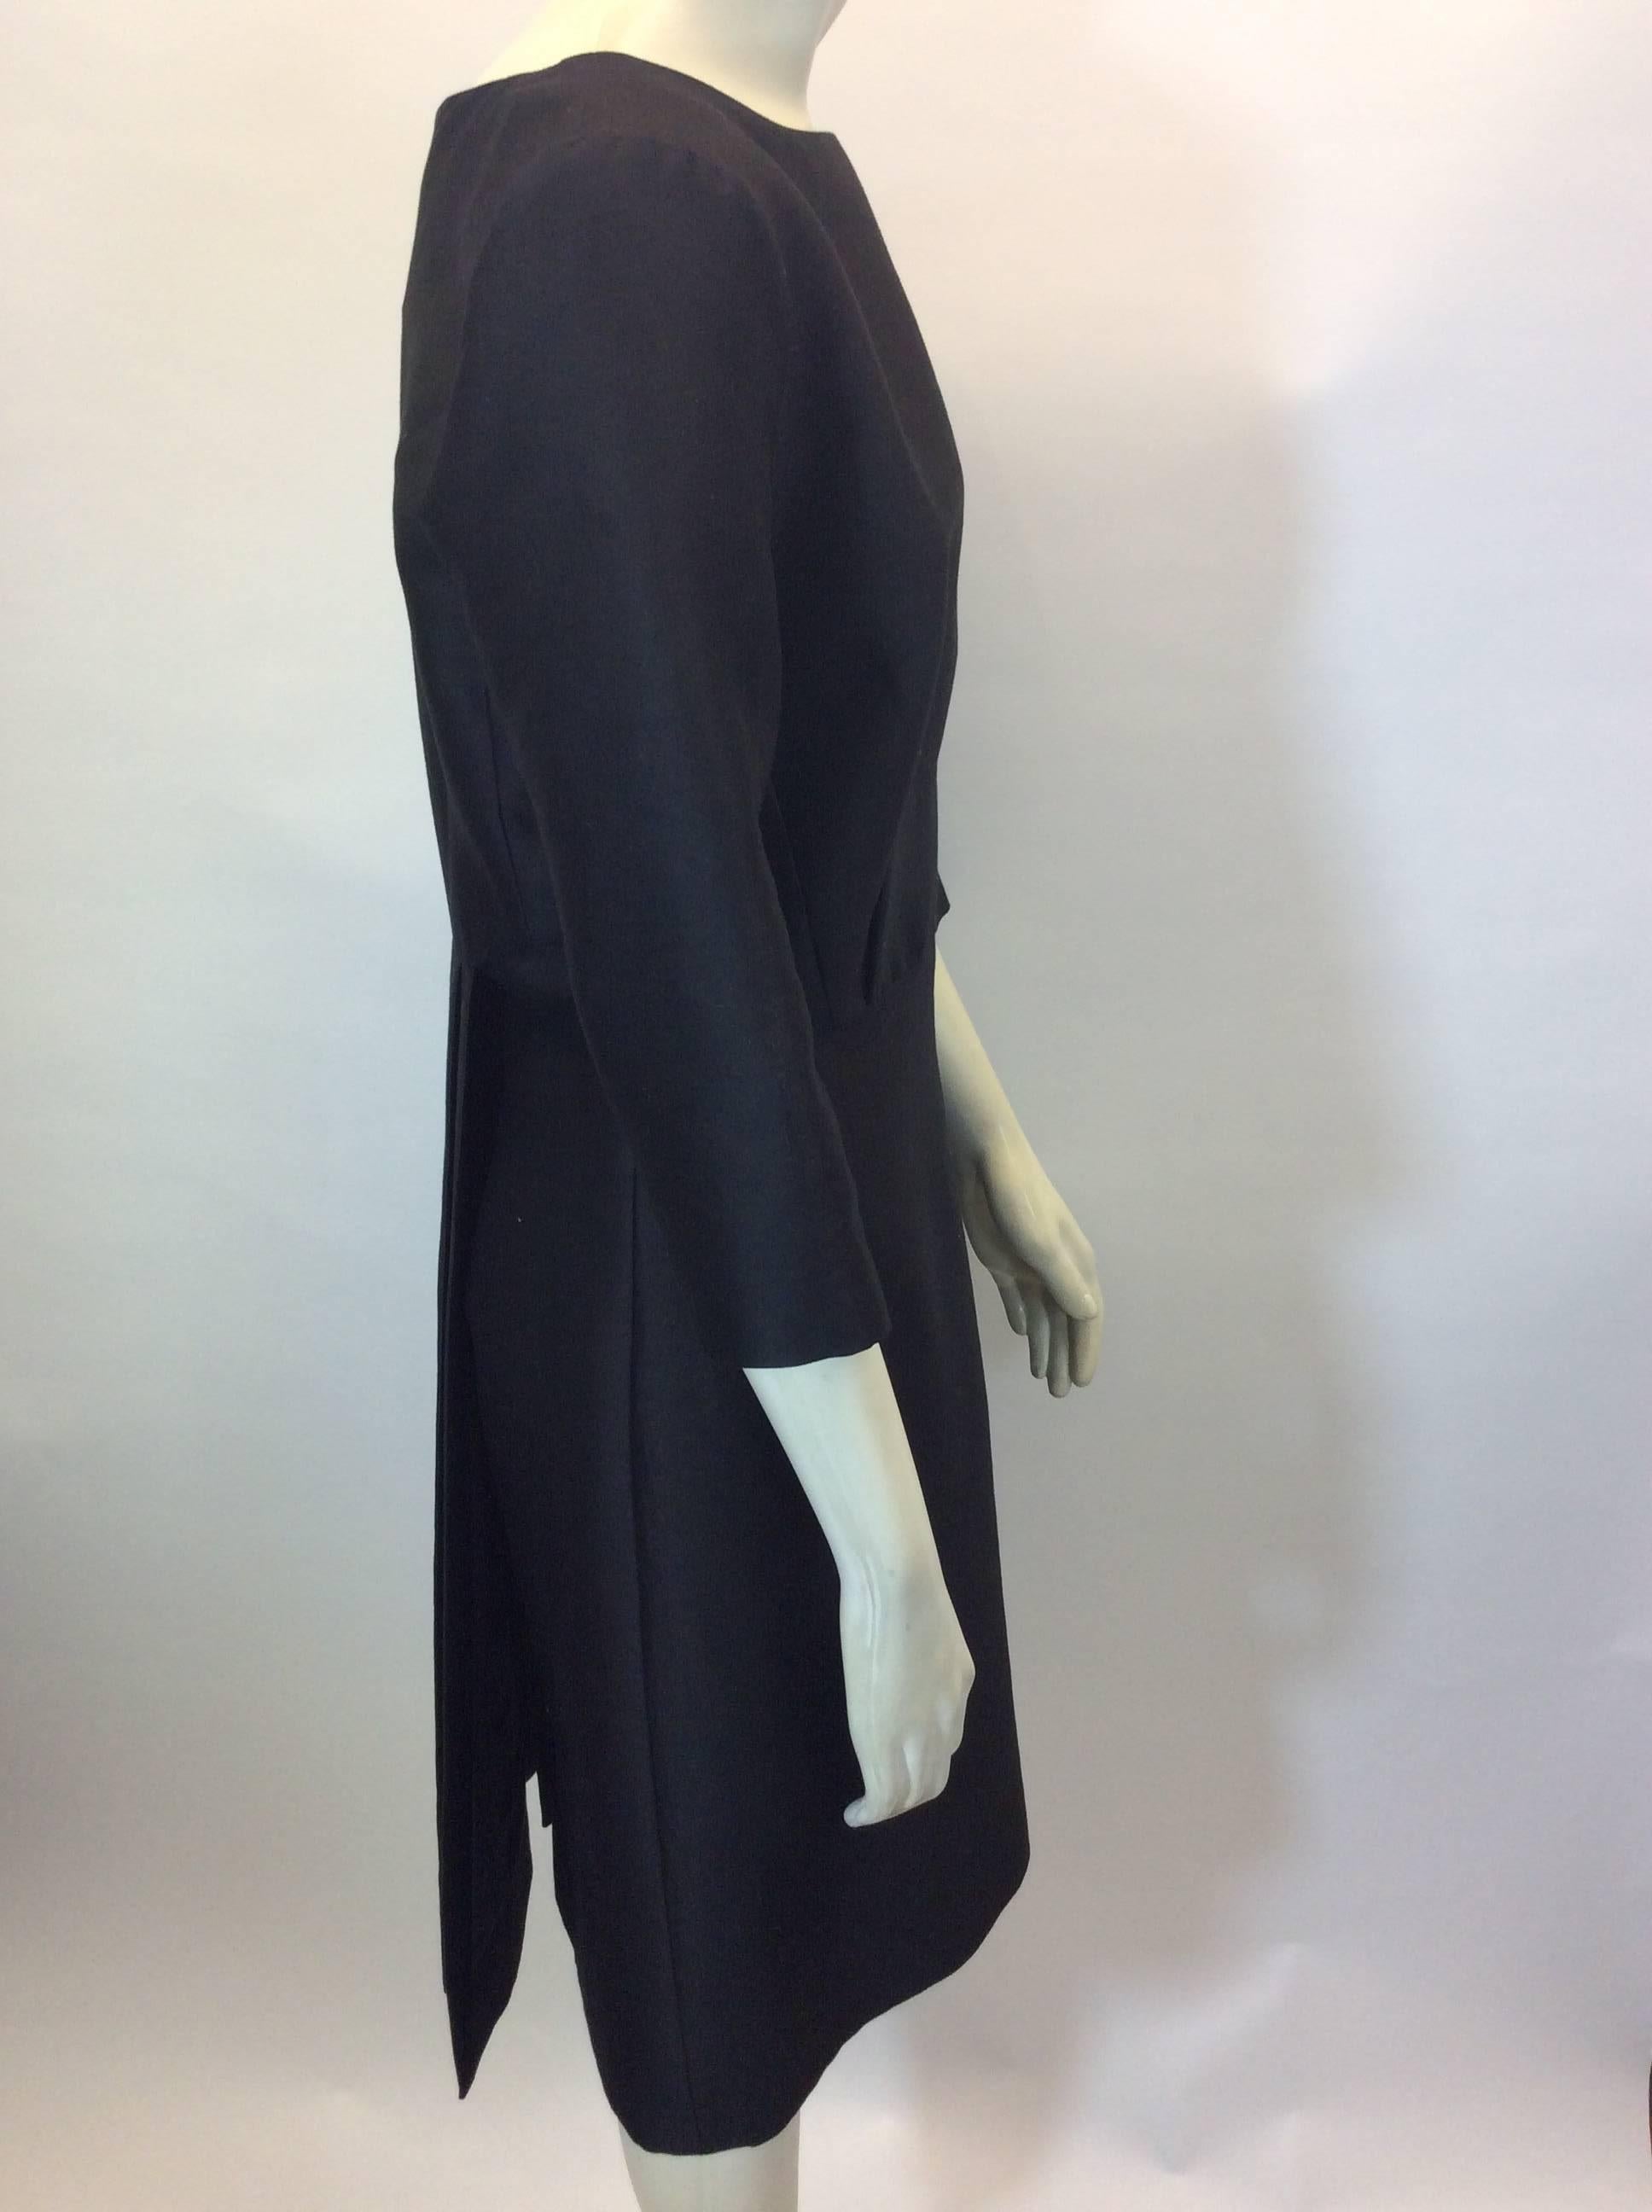 Balenciaga Black Dress with Pleated Back Detail In Excellent Condition For Sale In Narberth, PA